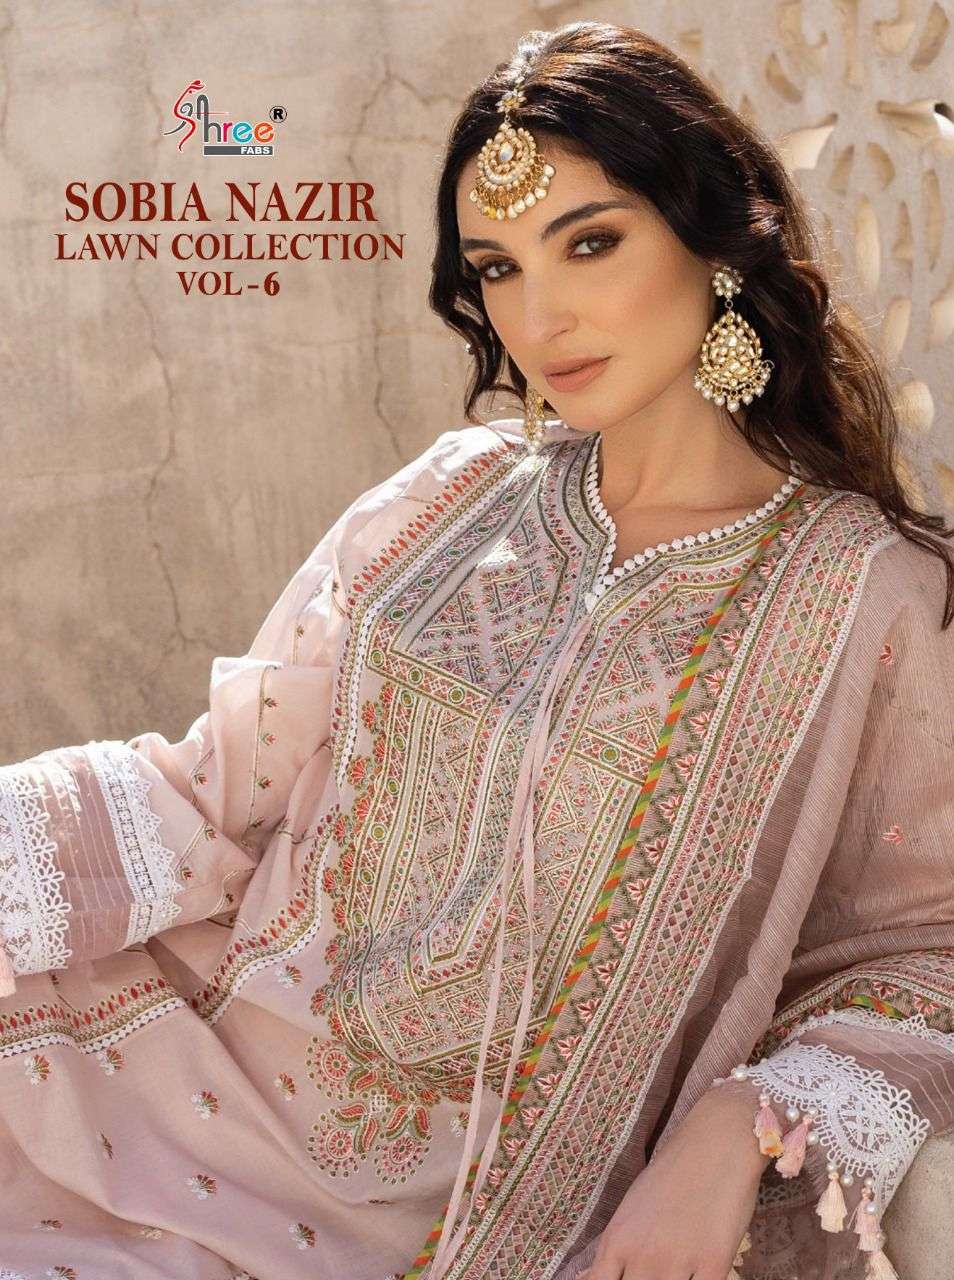 SHREE FAB SOBIA NAZIR LAWN COLLECTION VOL 6 DESIGNER COTTON SELF EMBROIDERED SUITS IN WHOLESALE RATE